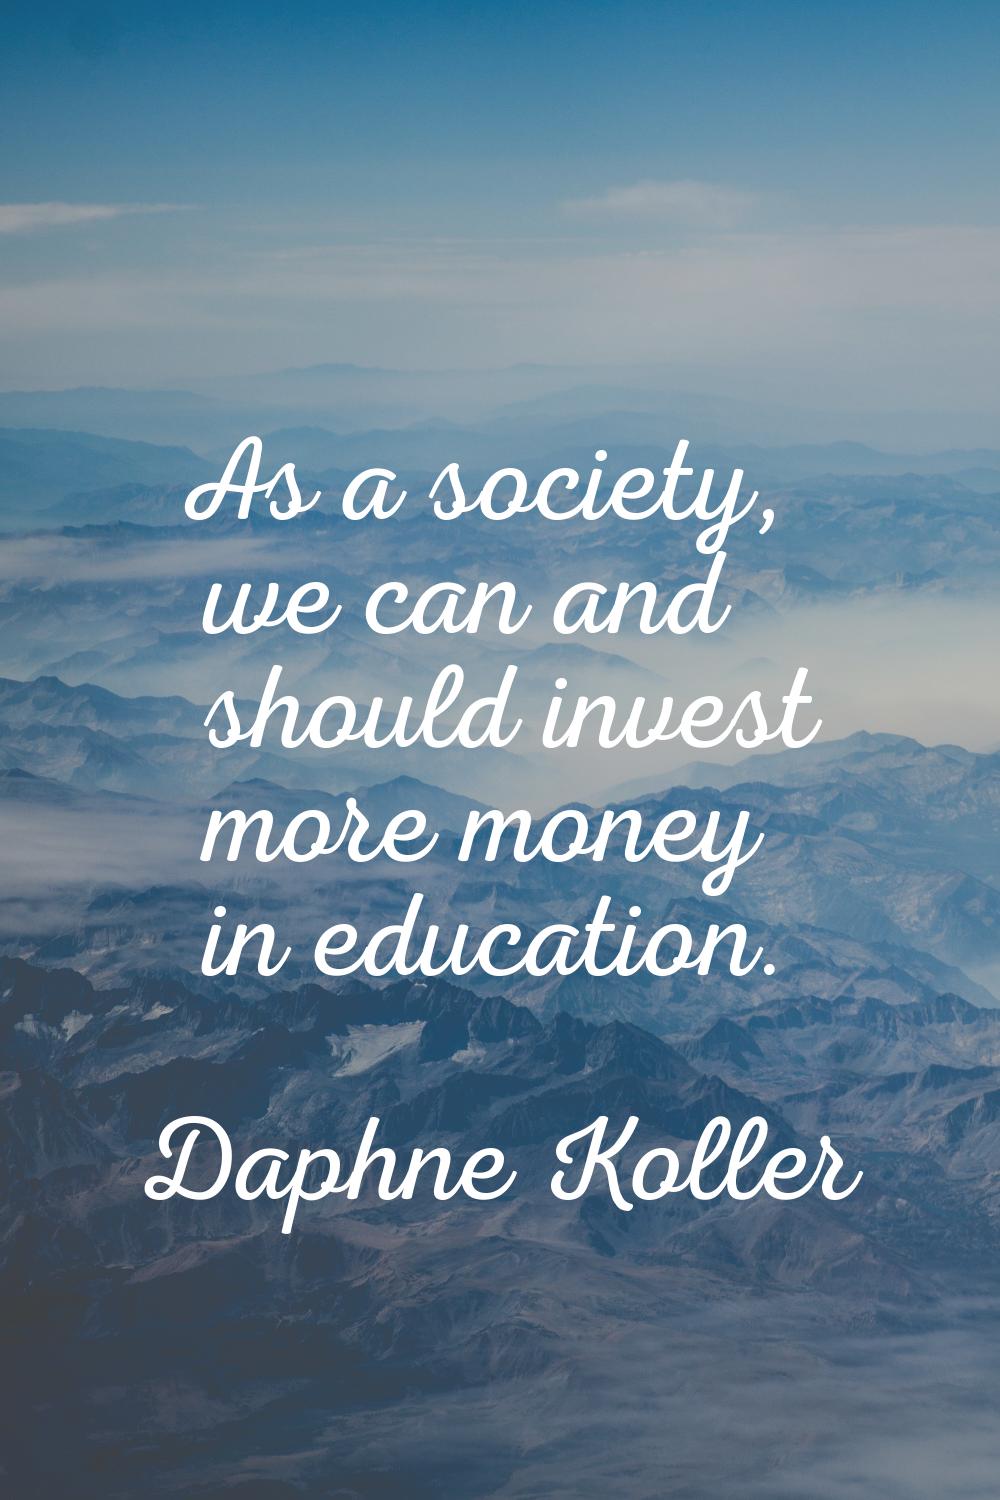 As a society, we can and should invest more money in education.